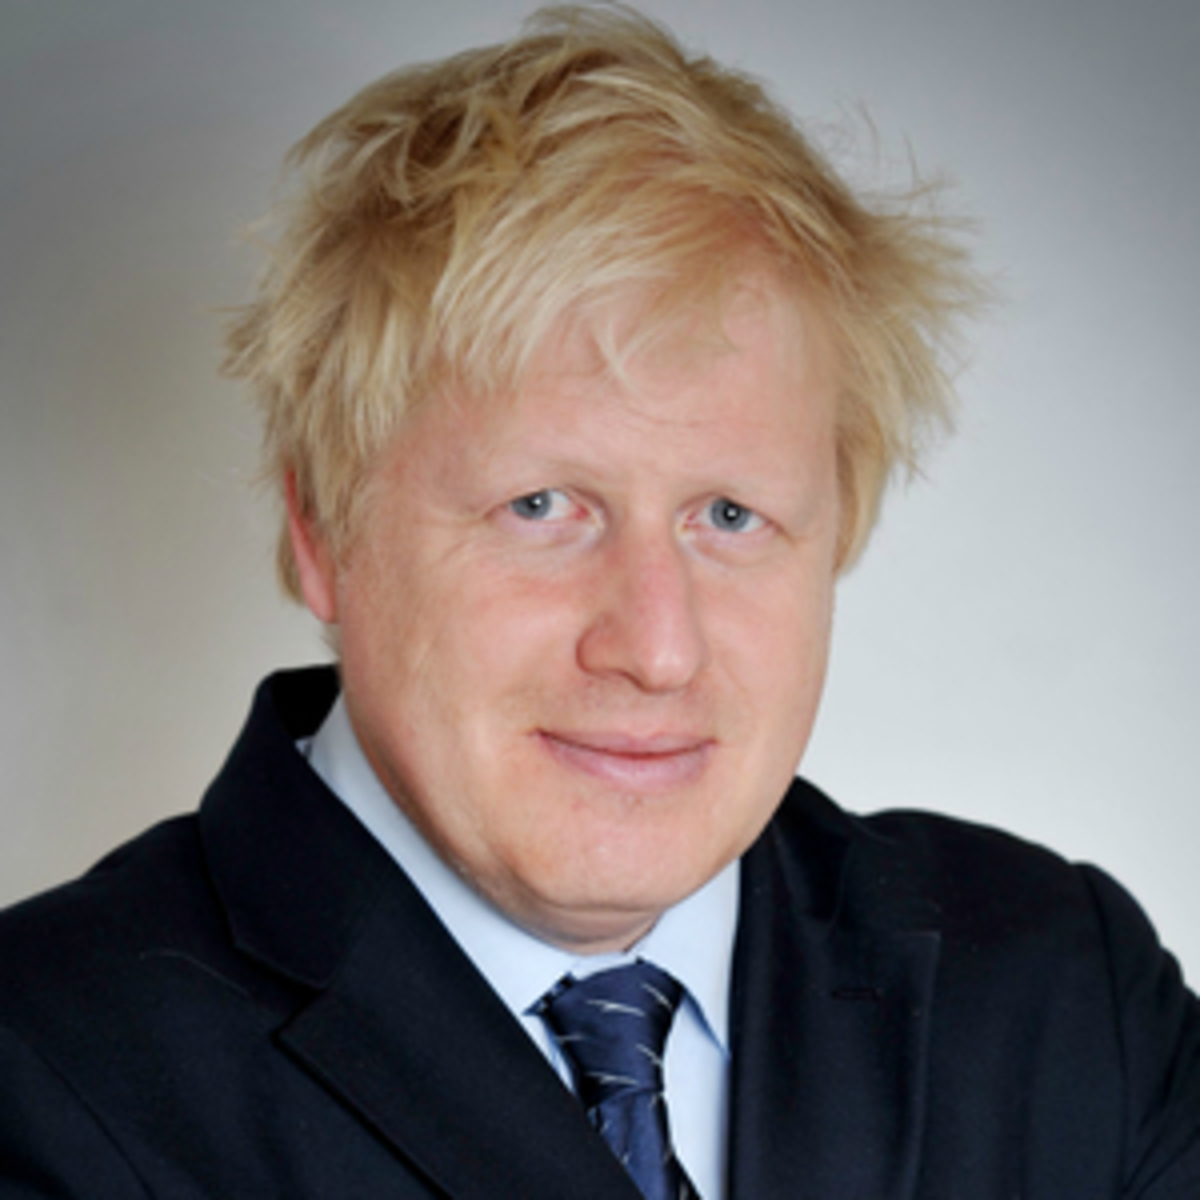 boris-bounce-of-vaccination-sleaze-not-cutting-through-yet-according-to-yougov-poll